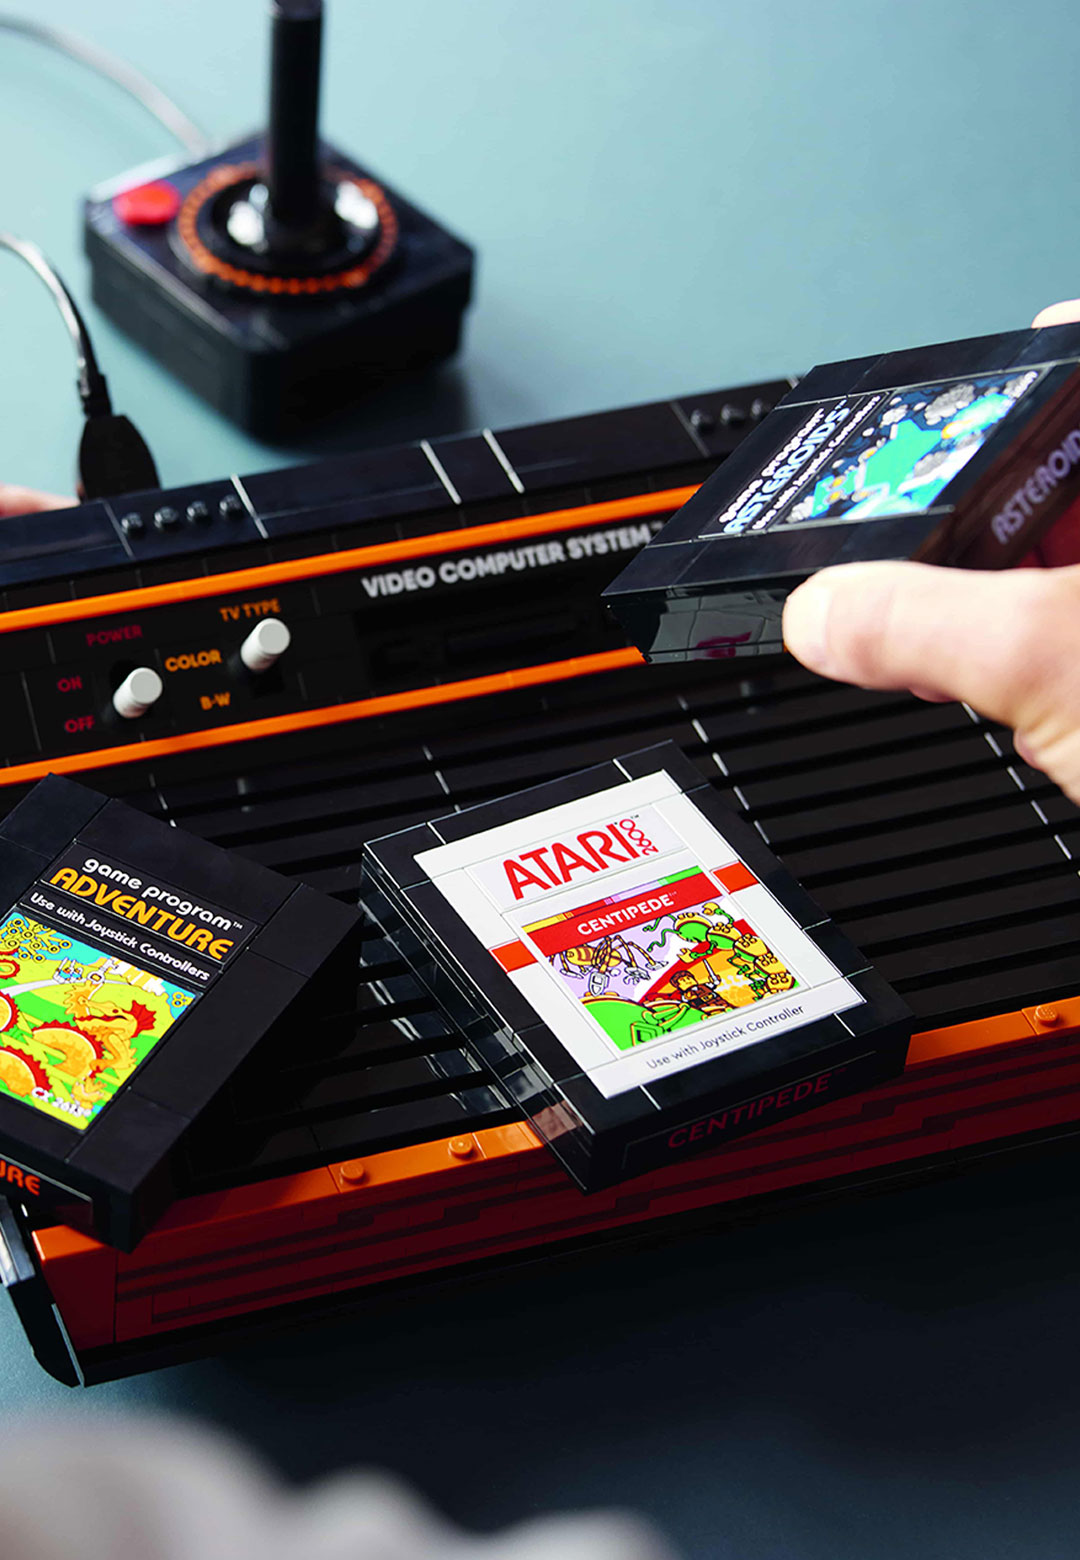 LEGO's Atari 2600 is a nostalgic tribute to the 8-bit video-game